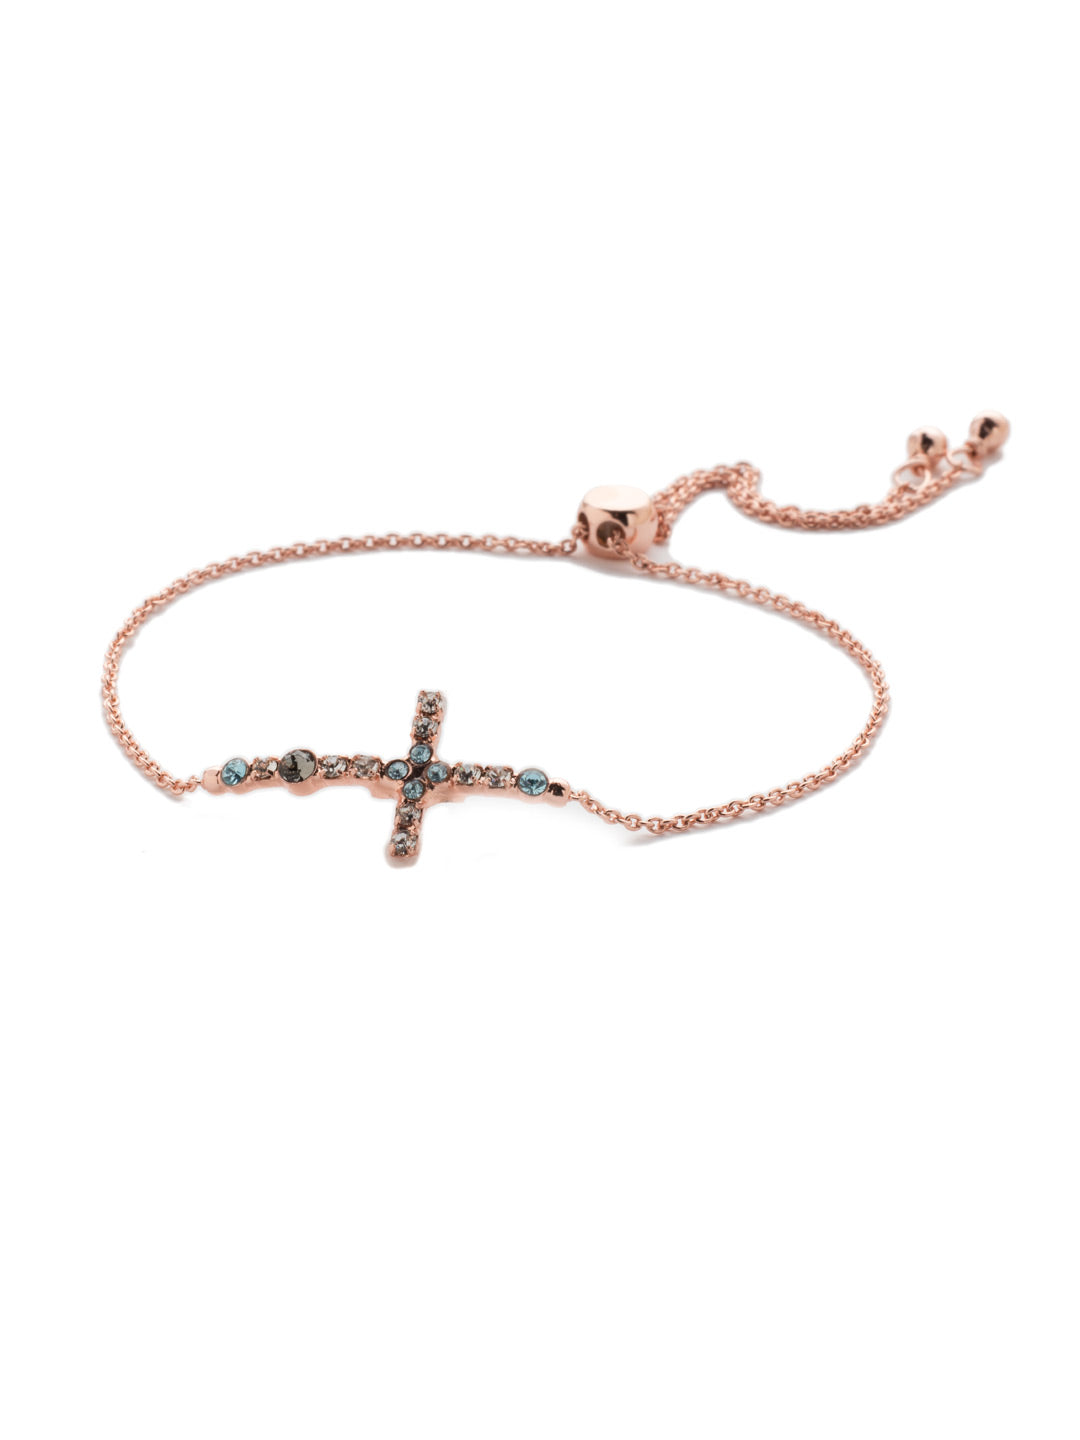 Giovanna Slider Bracelet - BEN1RGCAZ - The Giovanna Slider Bracelet features the crystal-encrusted cross fans are looking to slip on. Just adjust to your wrist size and you're set. From Sorrelli's Crystal Azure collection in our Rose Gold-tone finish.